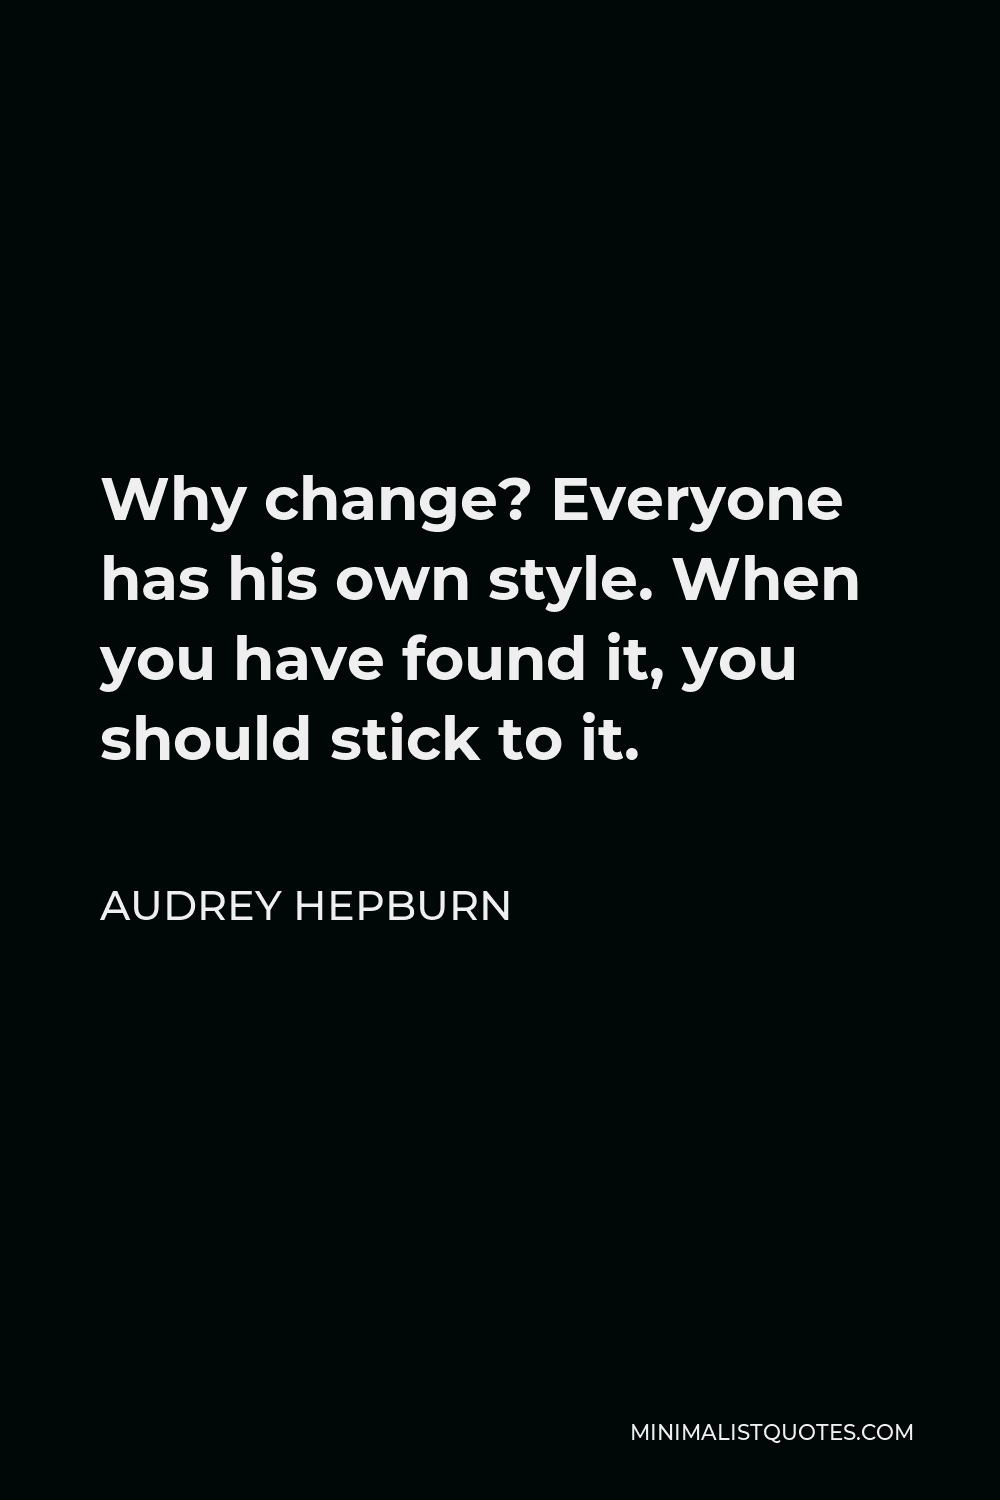 Audrey Hepburn Quote - Why change? Everyone has his own style. When you have found it, you should stick to it.